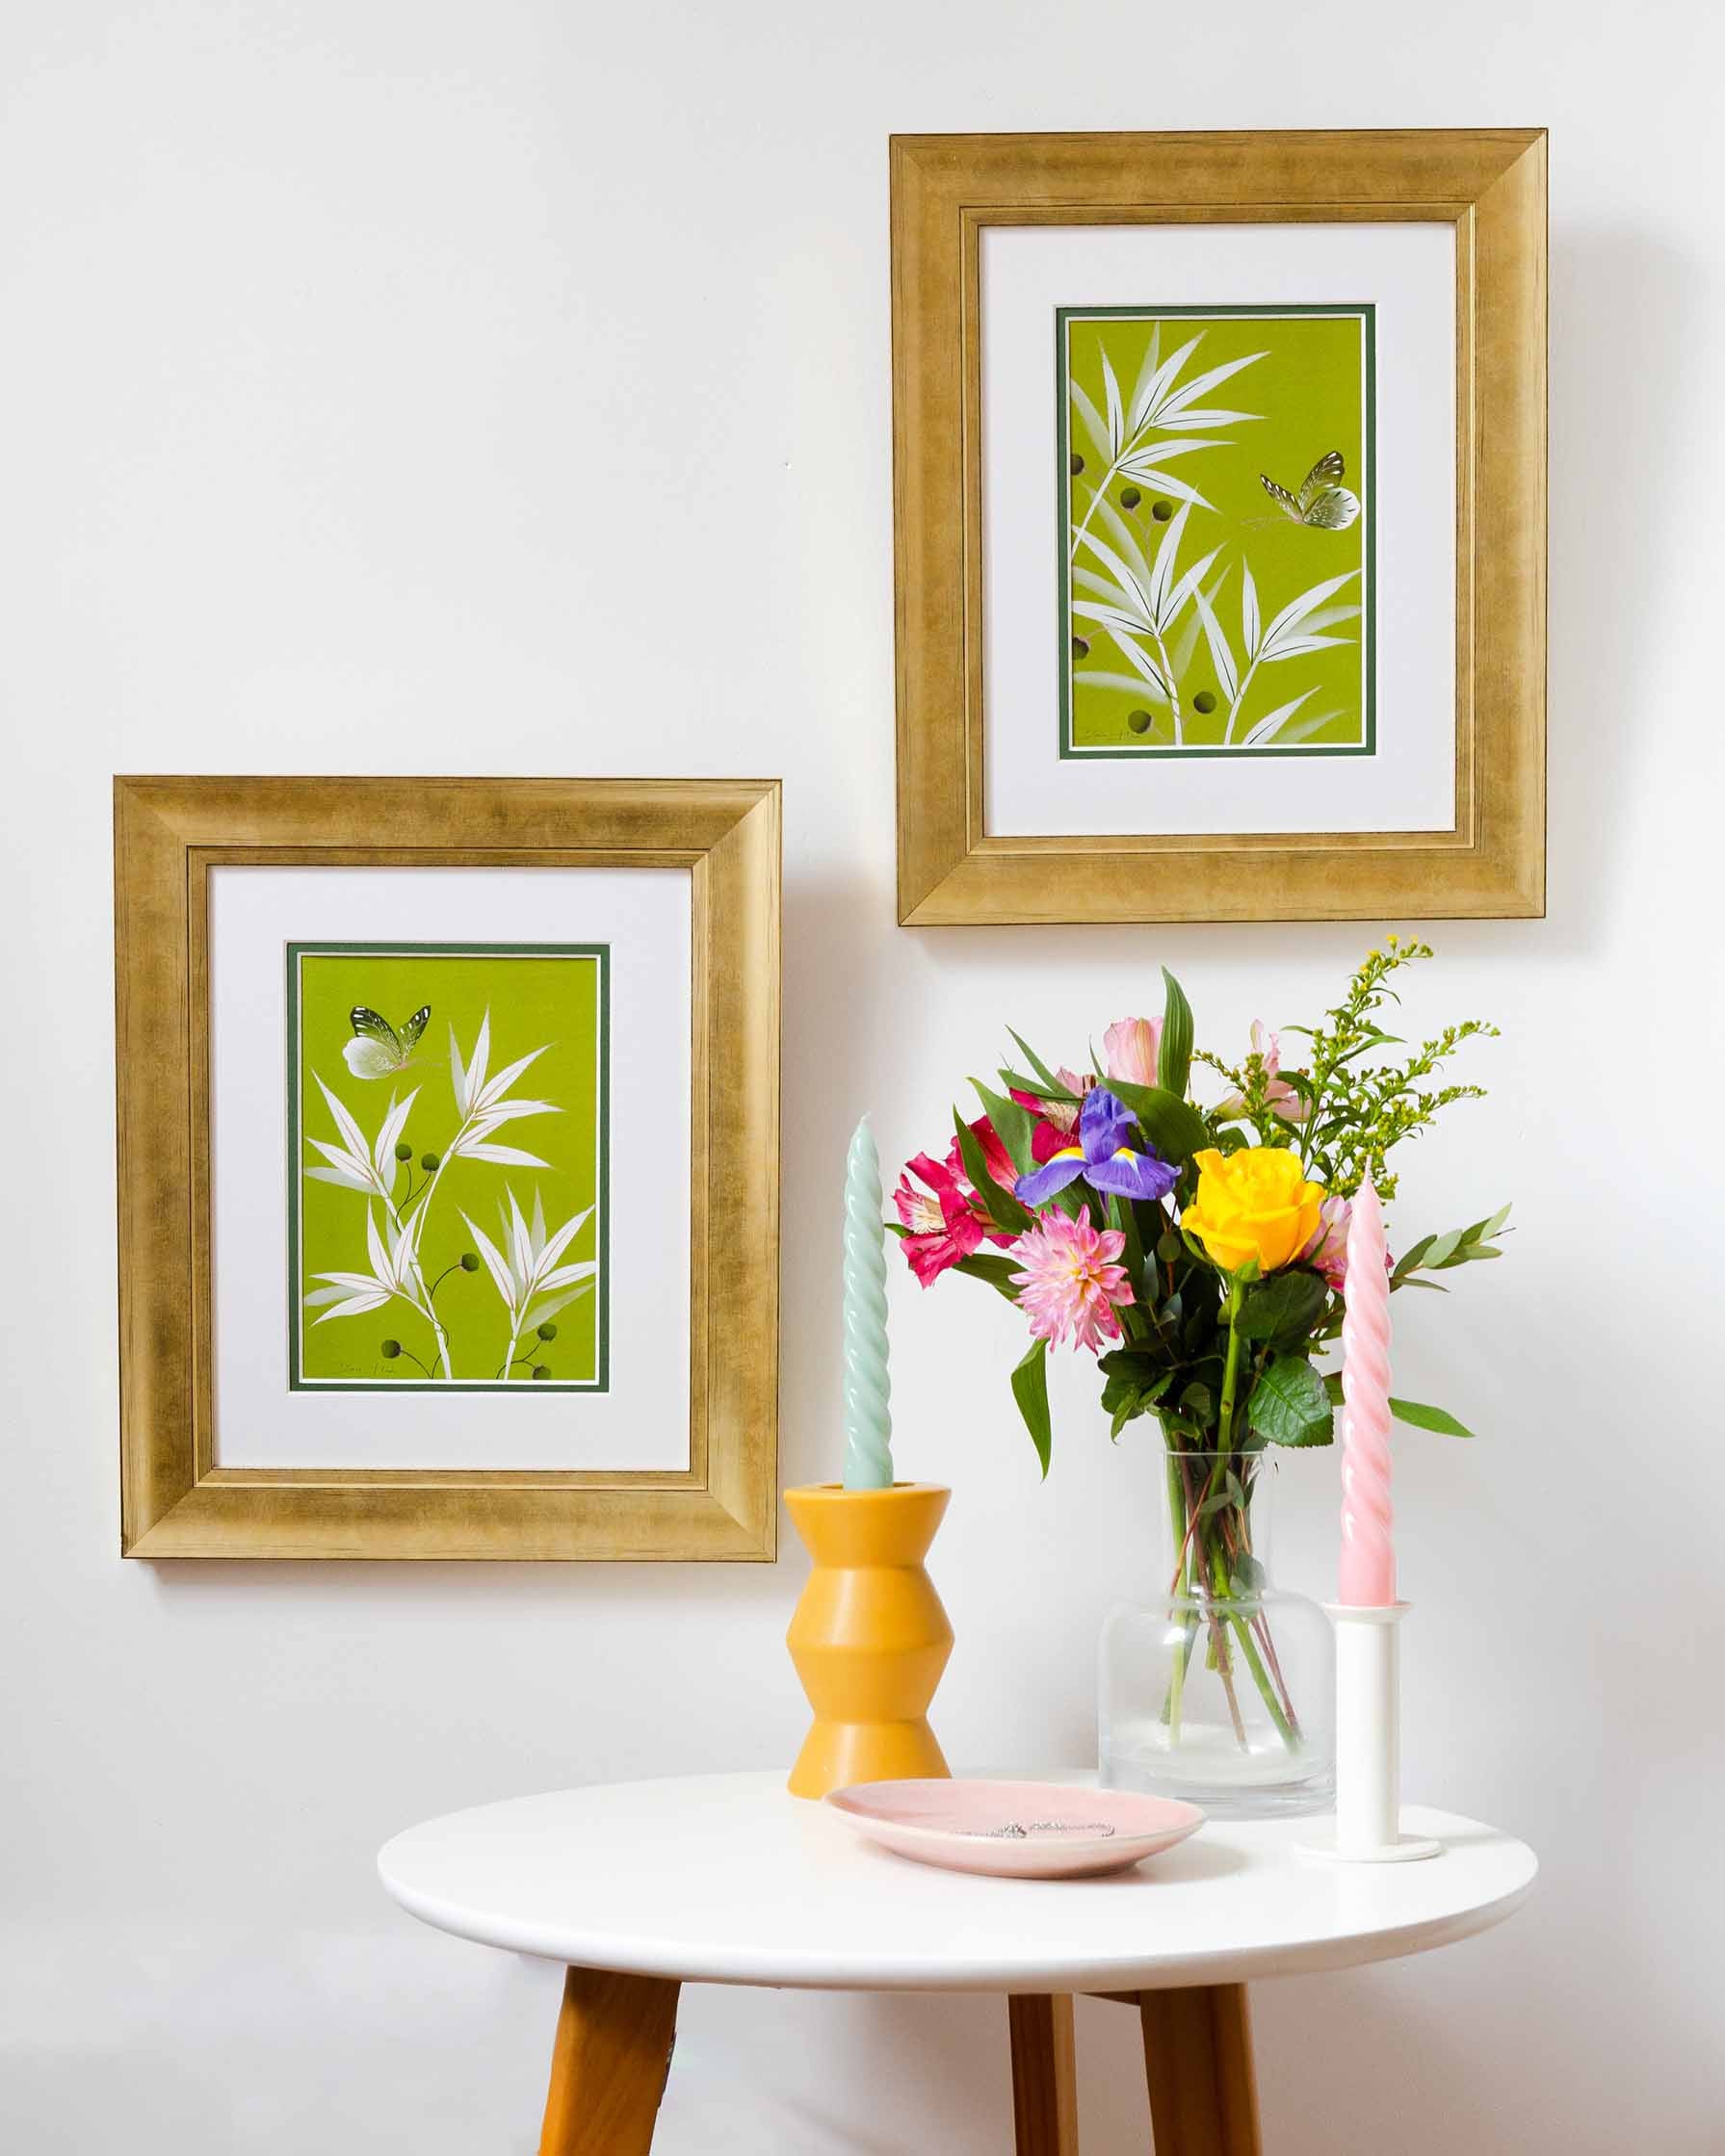 Diane Hill's prints 'Clarissa & Joanna' in gold frames on a white wall with a table containing flowers and candles beneath it